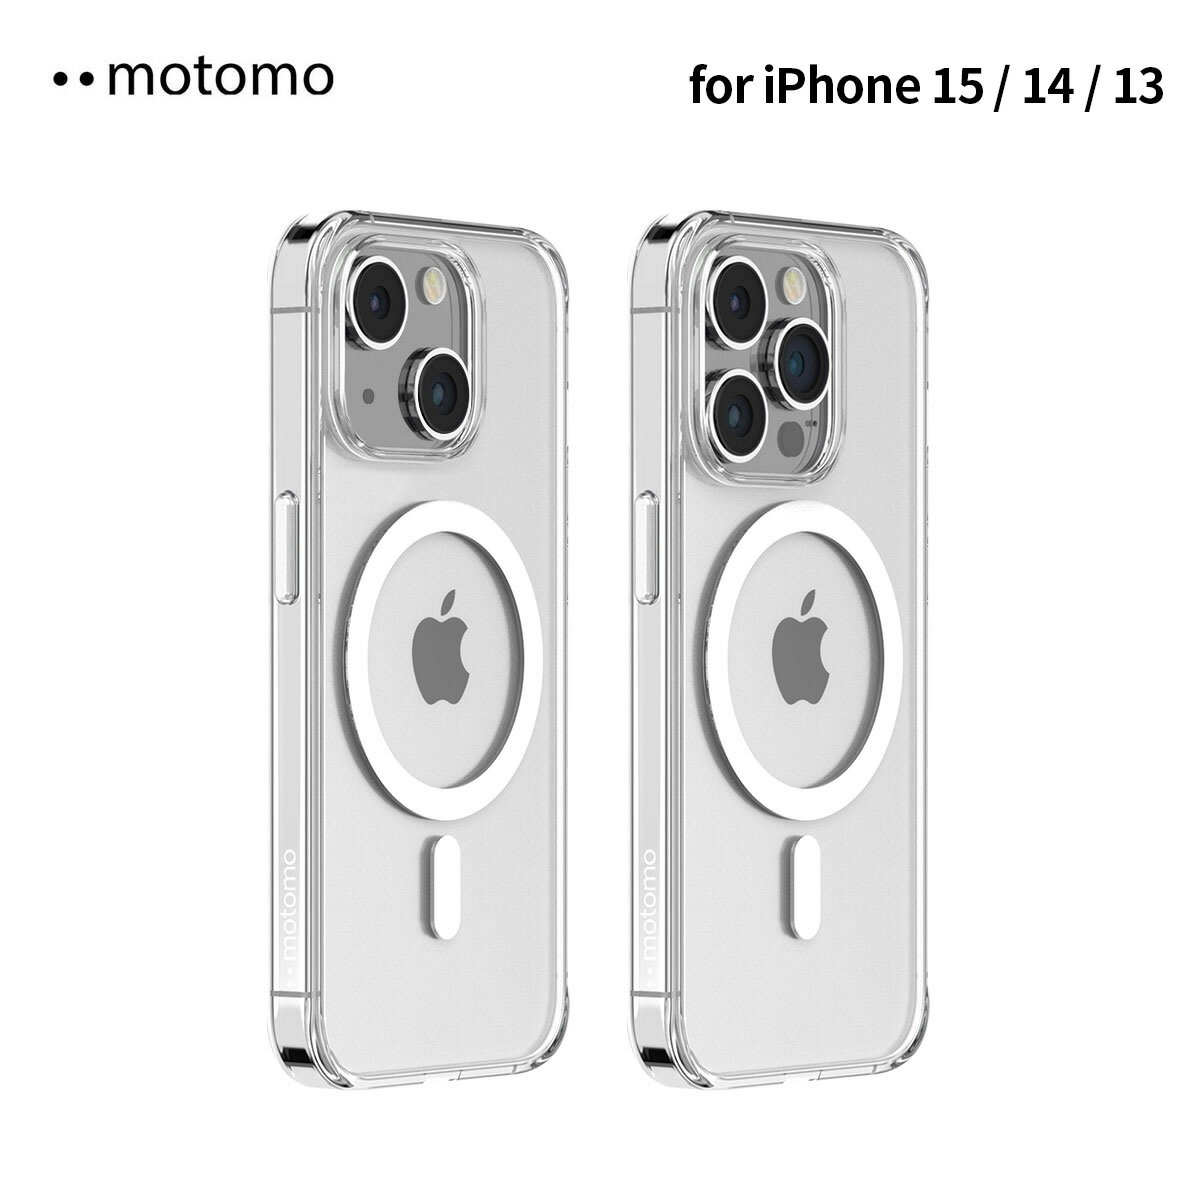 iPhone15p ACtH15 iPhone 15 motomo MAGSAFE CLEAR CASE NAJo[ UVR[eBO ho A~{^ }Olbg MagSafeΉ NA P[X g [iPhone 14 iPhone 13]